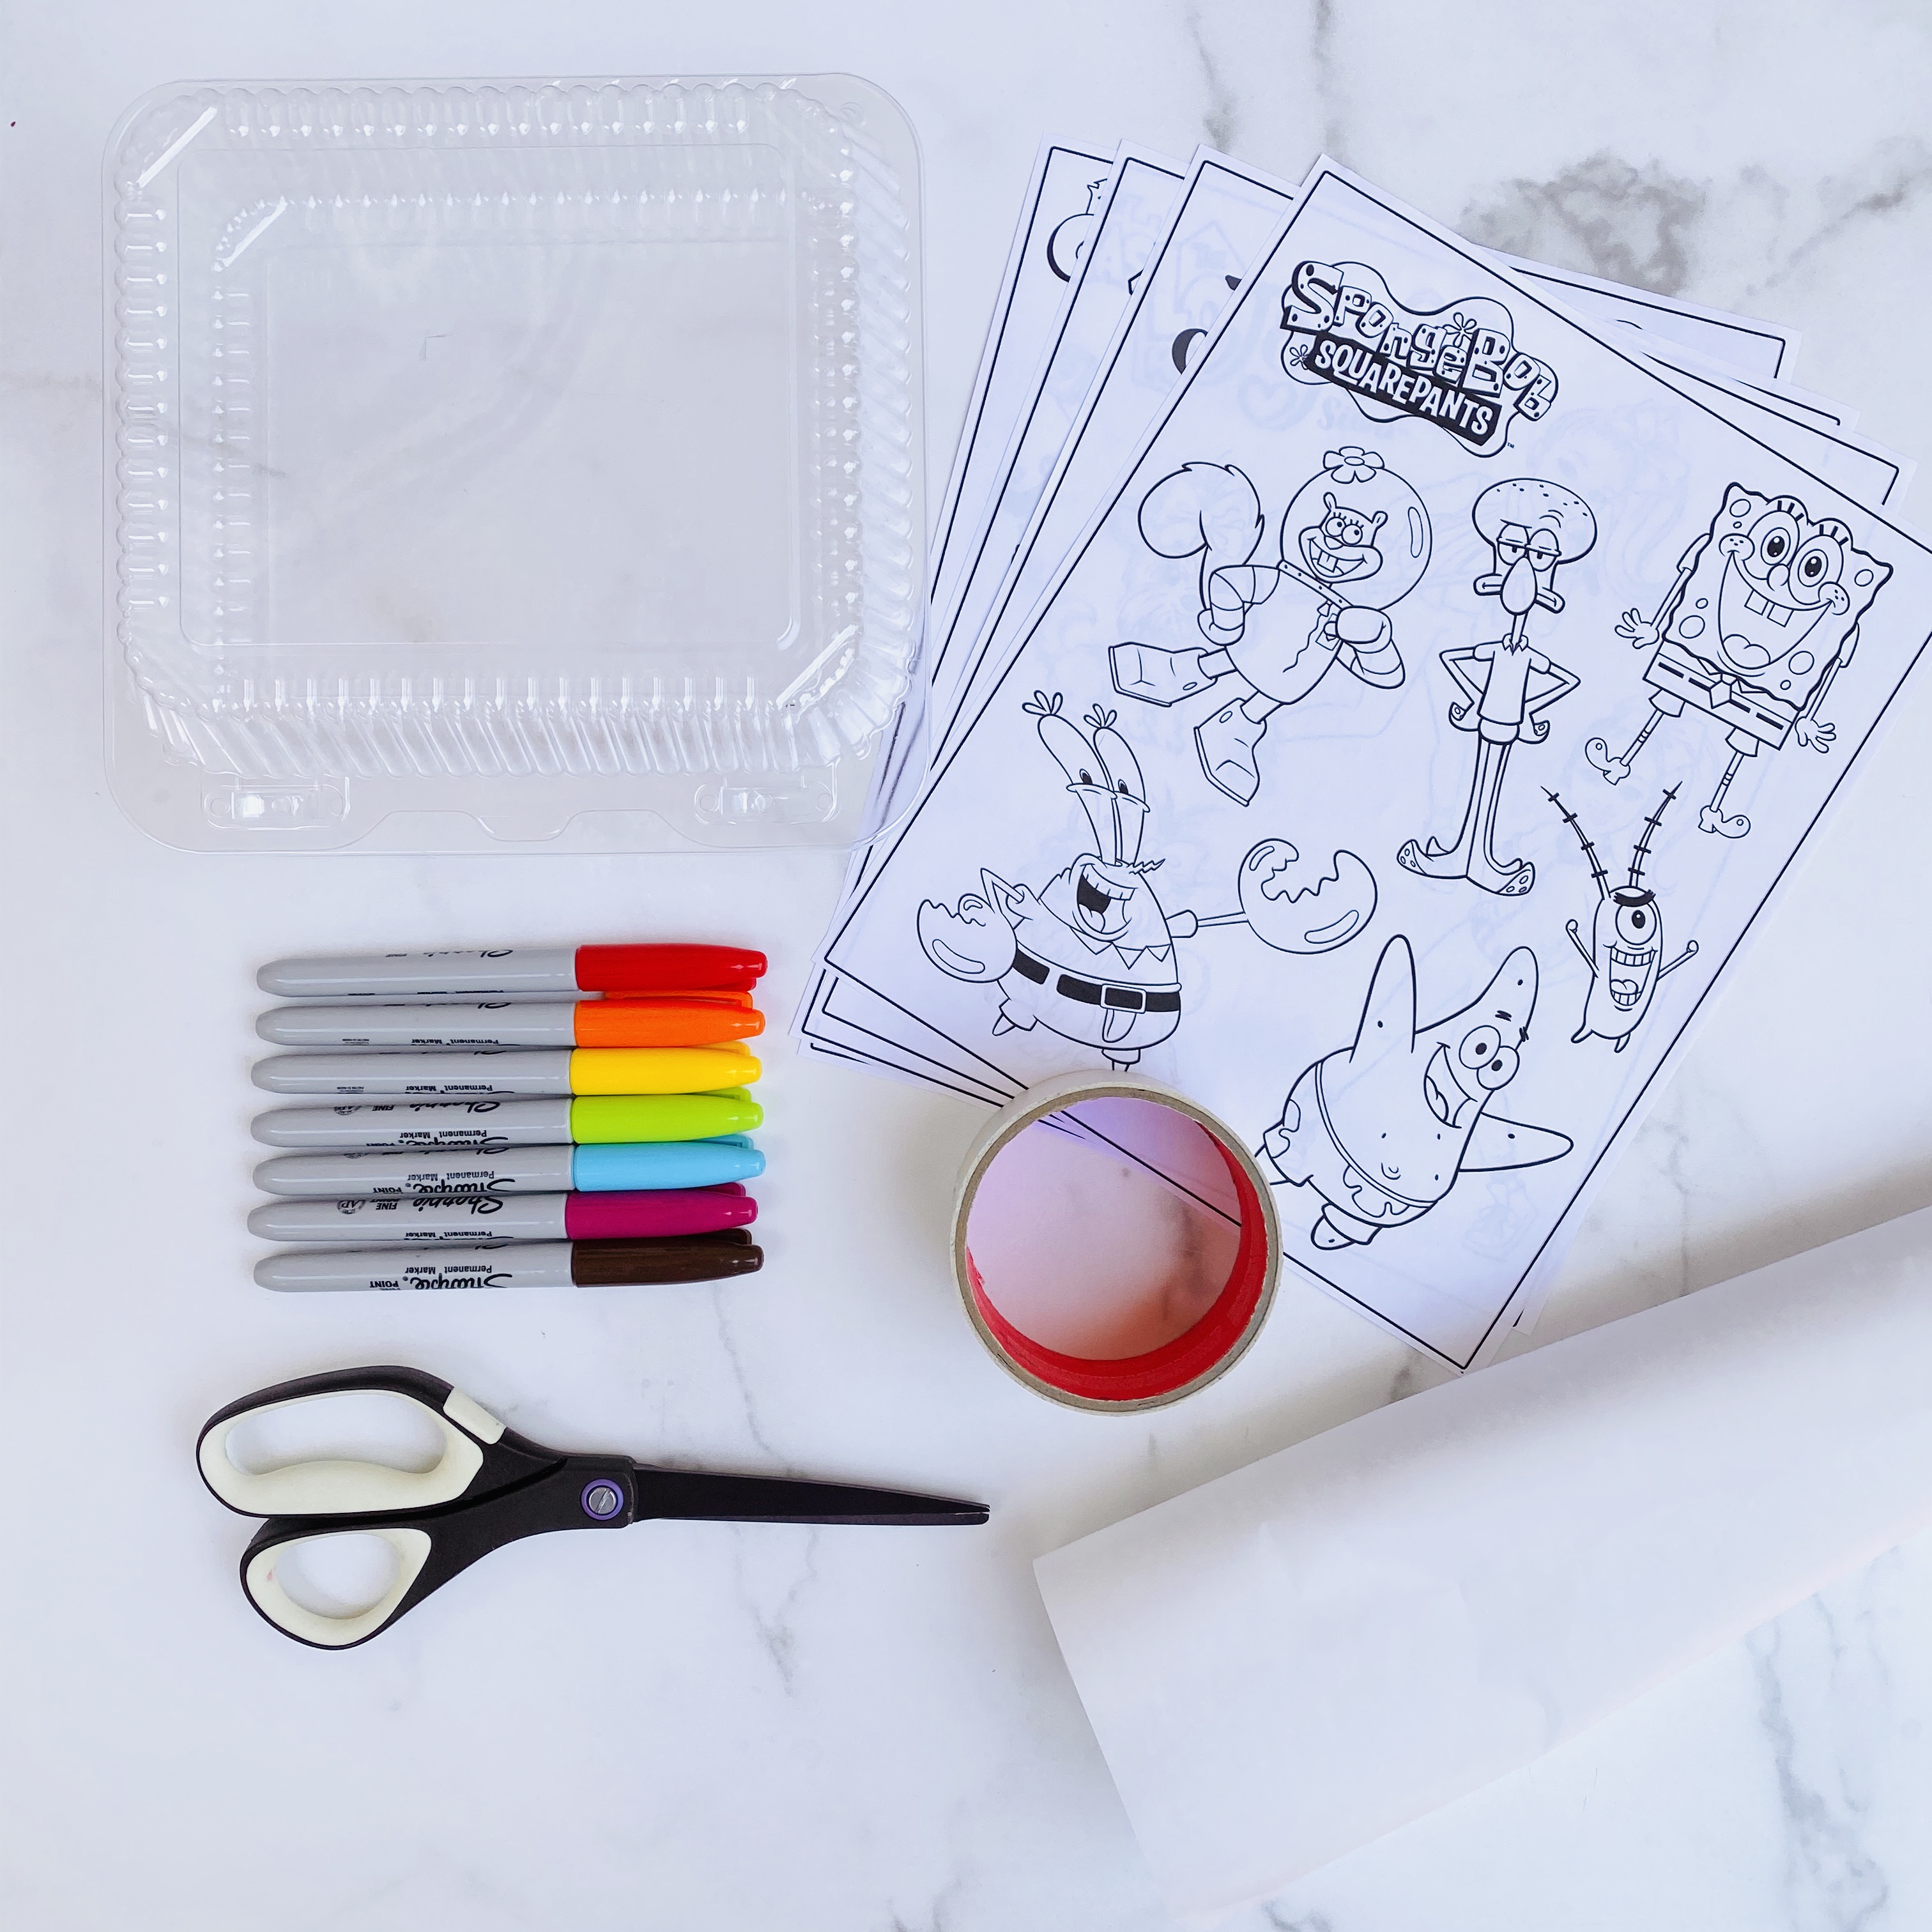 Draw So Cute - DIY Learn how to make these super fun Plastic Shrink Art  with recycled plastic containers. Watch them melt and shrink too! So  satisfying! ;)